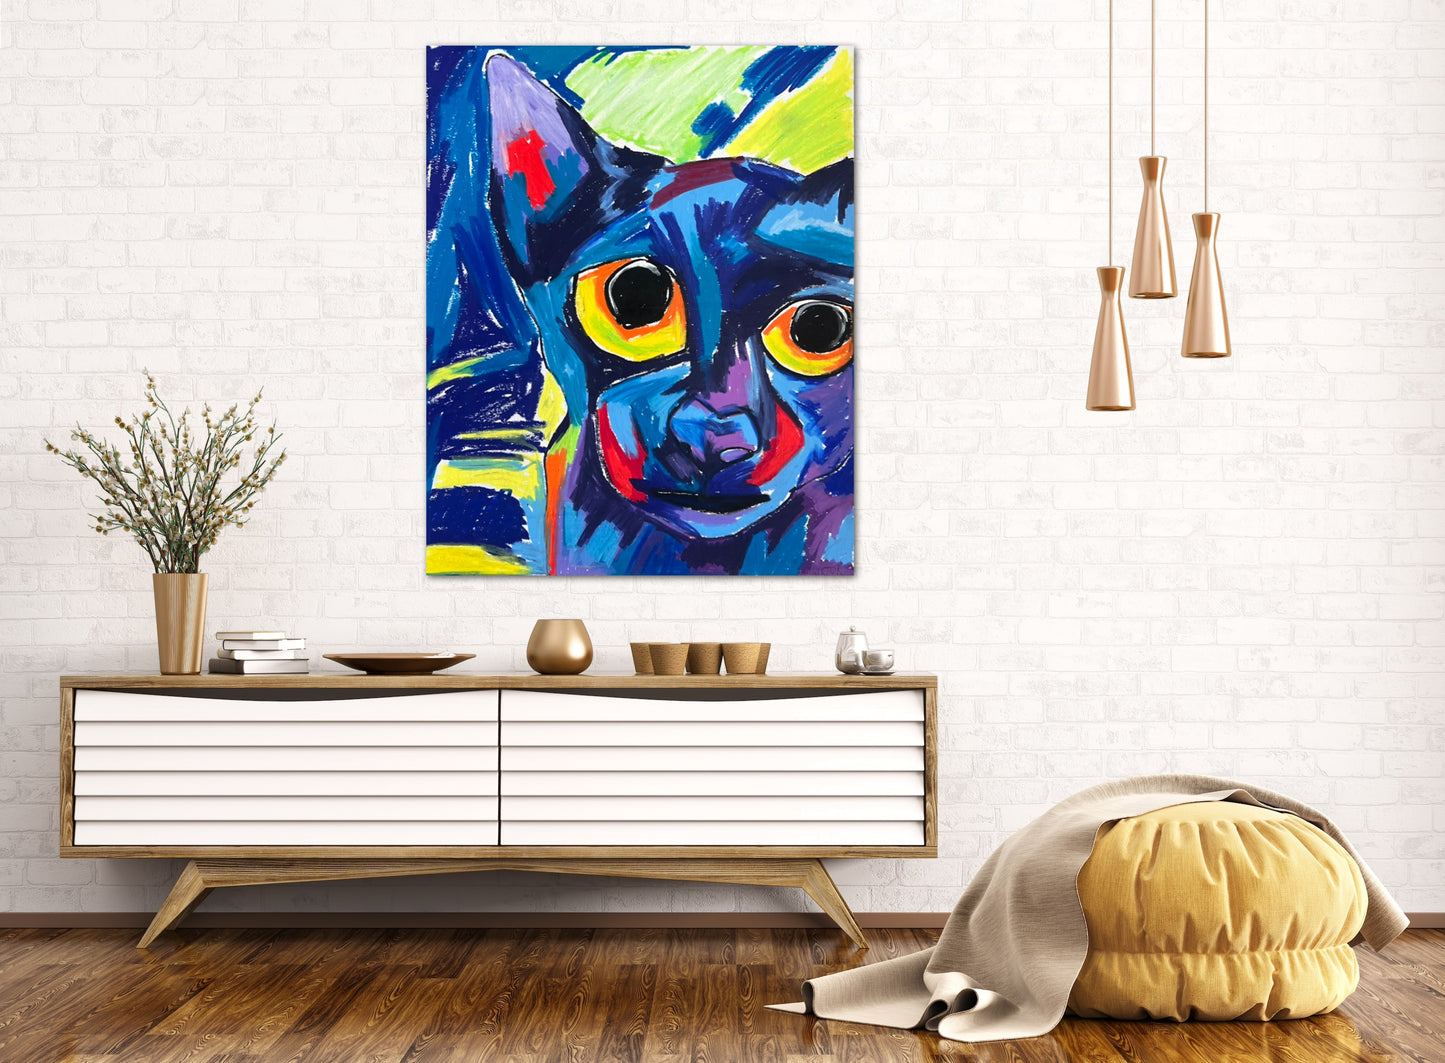 The Blue Cat - Print, Poster, Stretched Canvas Print